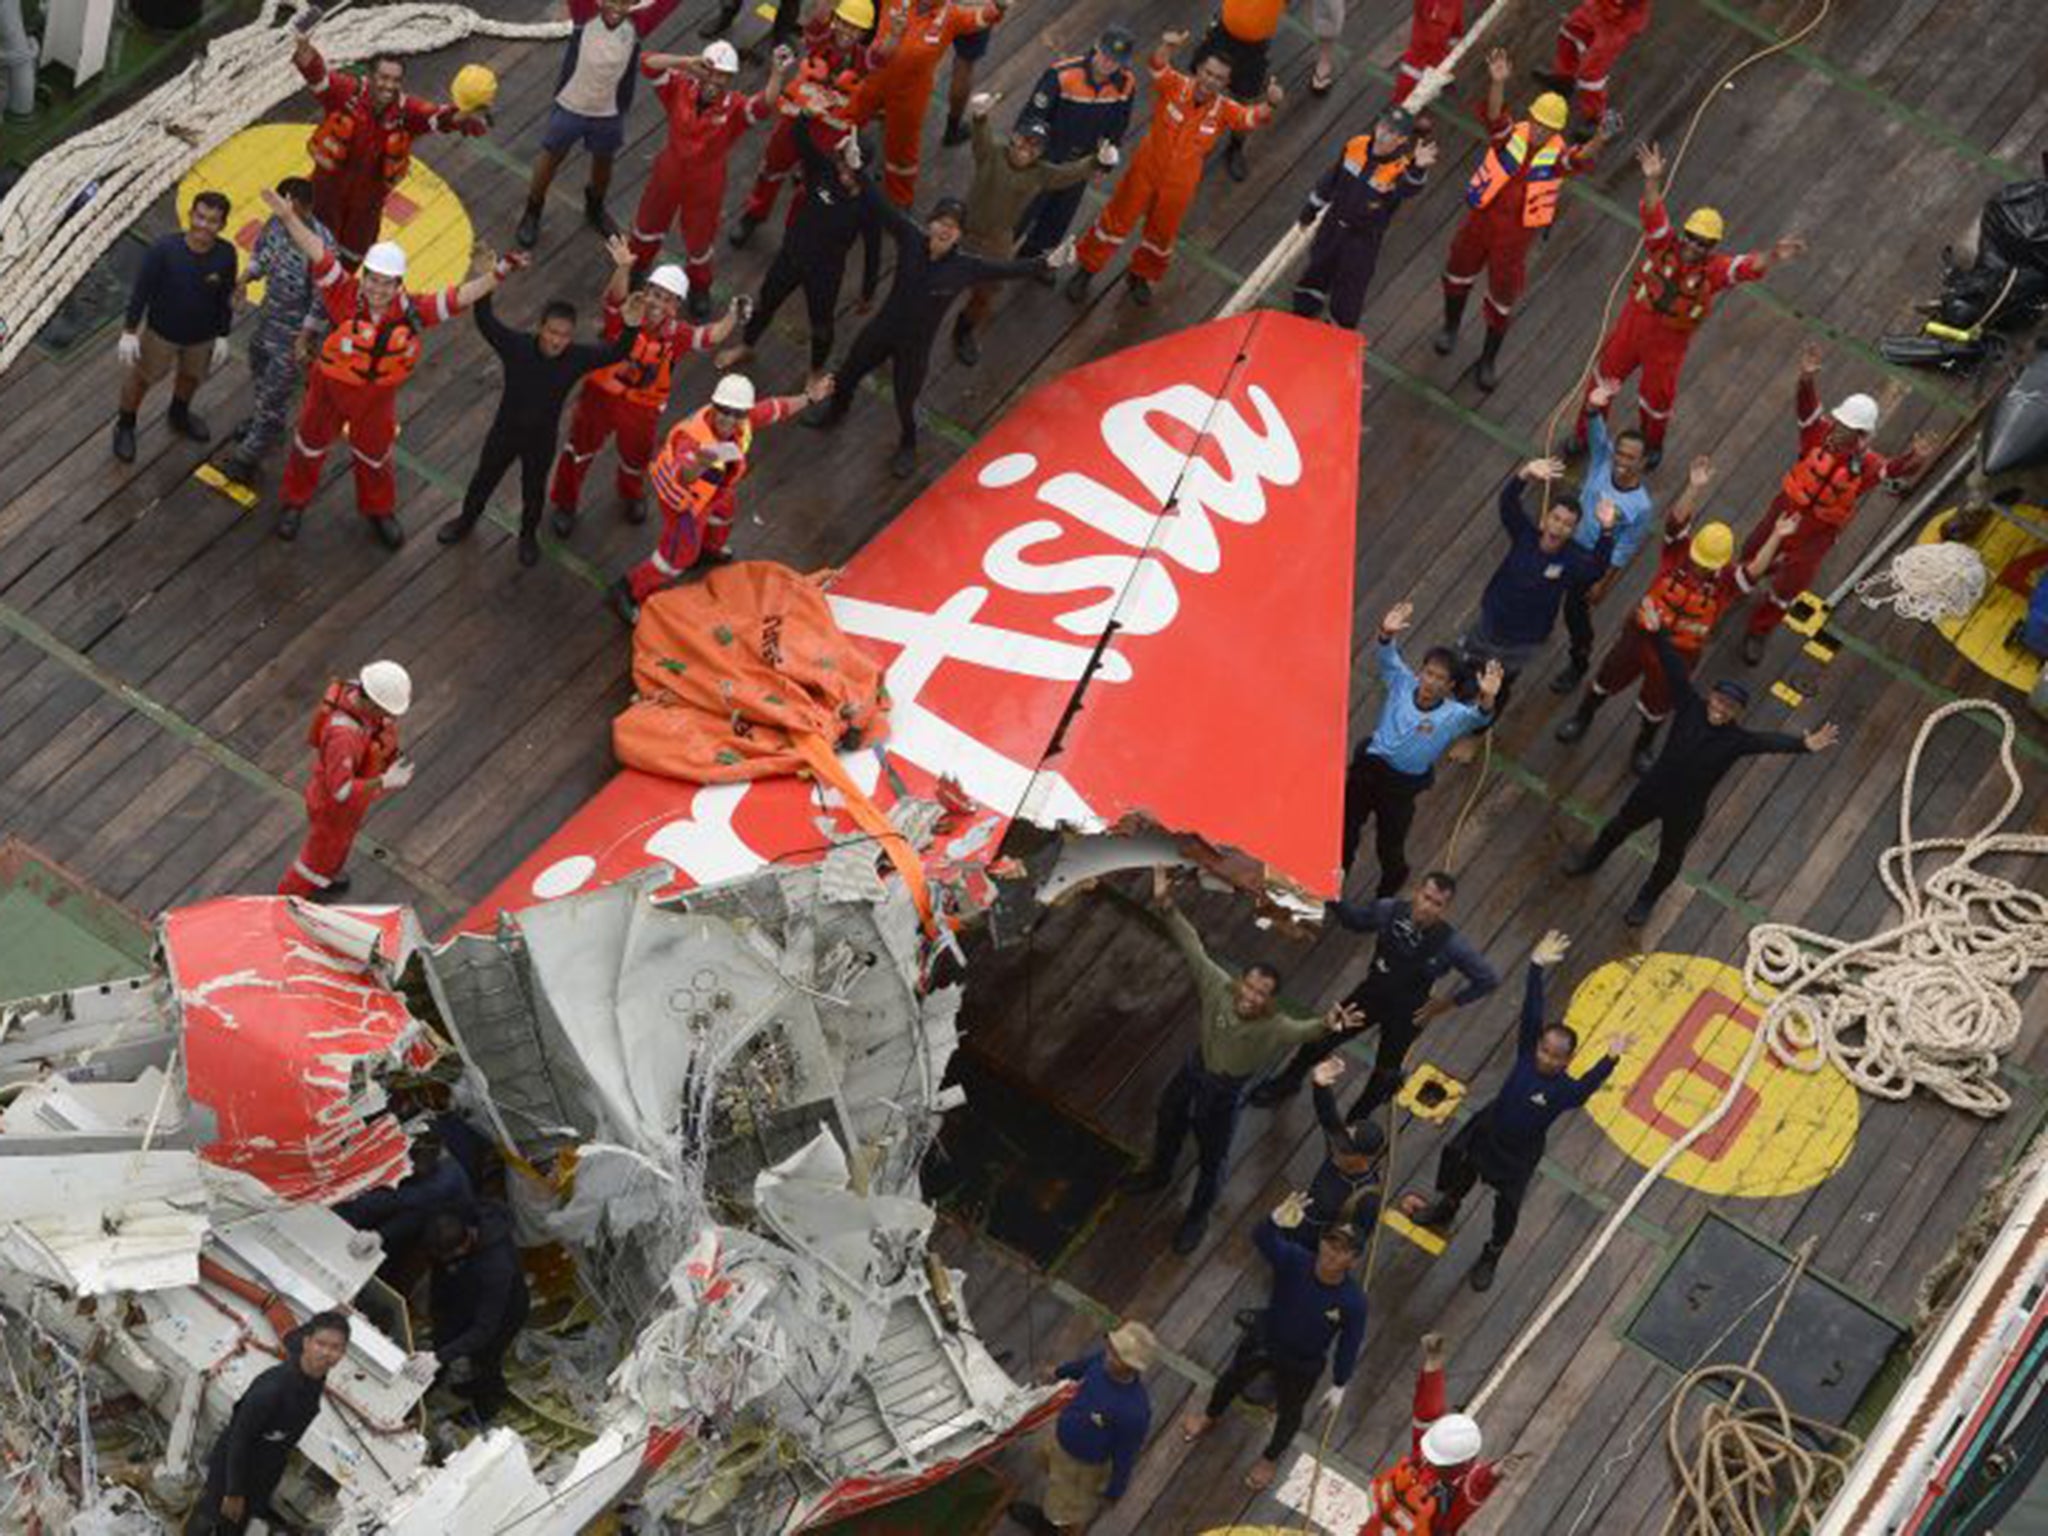 Members of the salvage crew with the tail section of the AirAsia jet liner (AP)